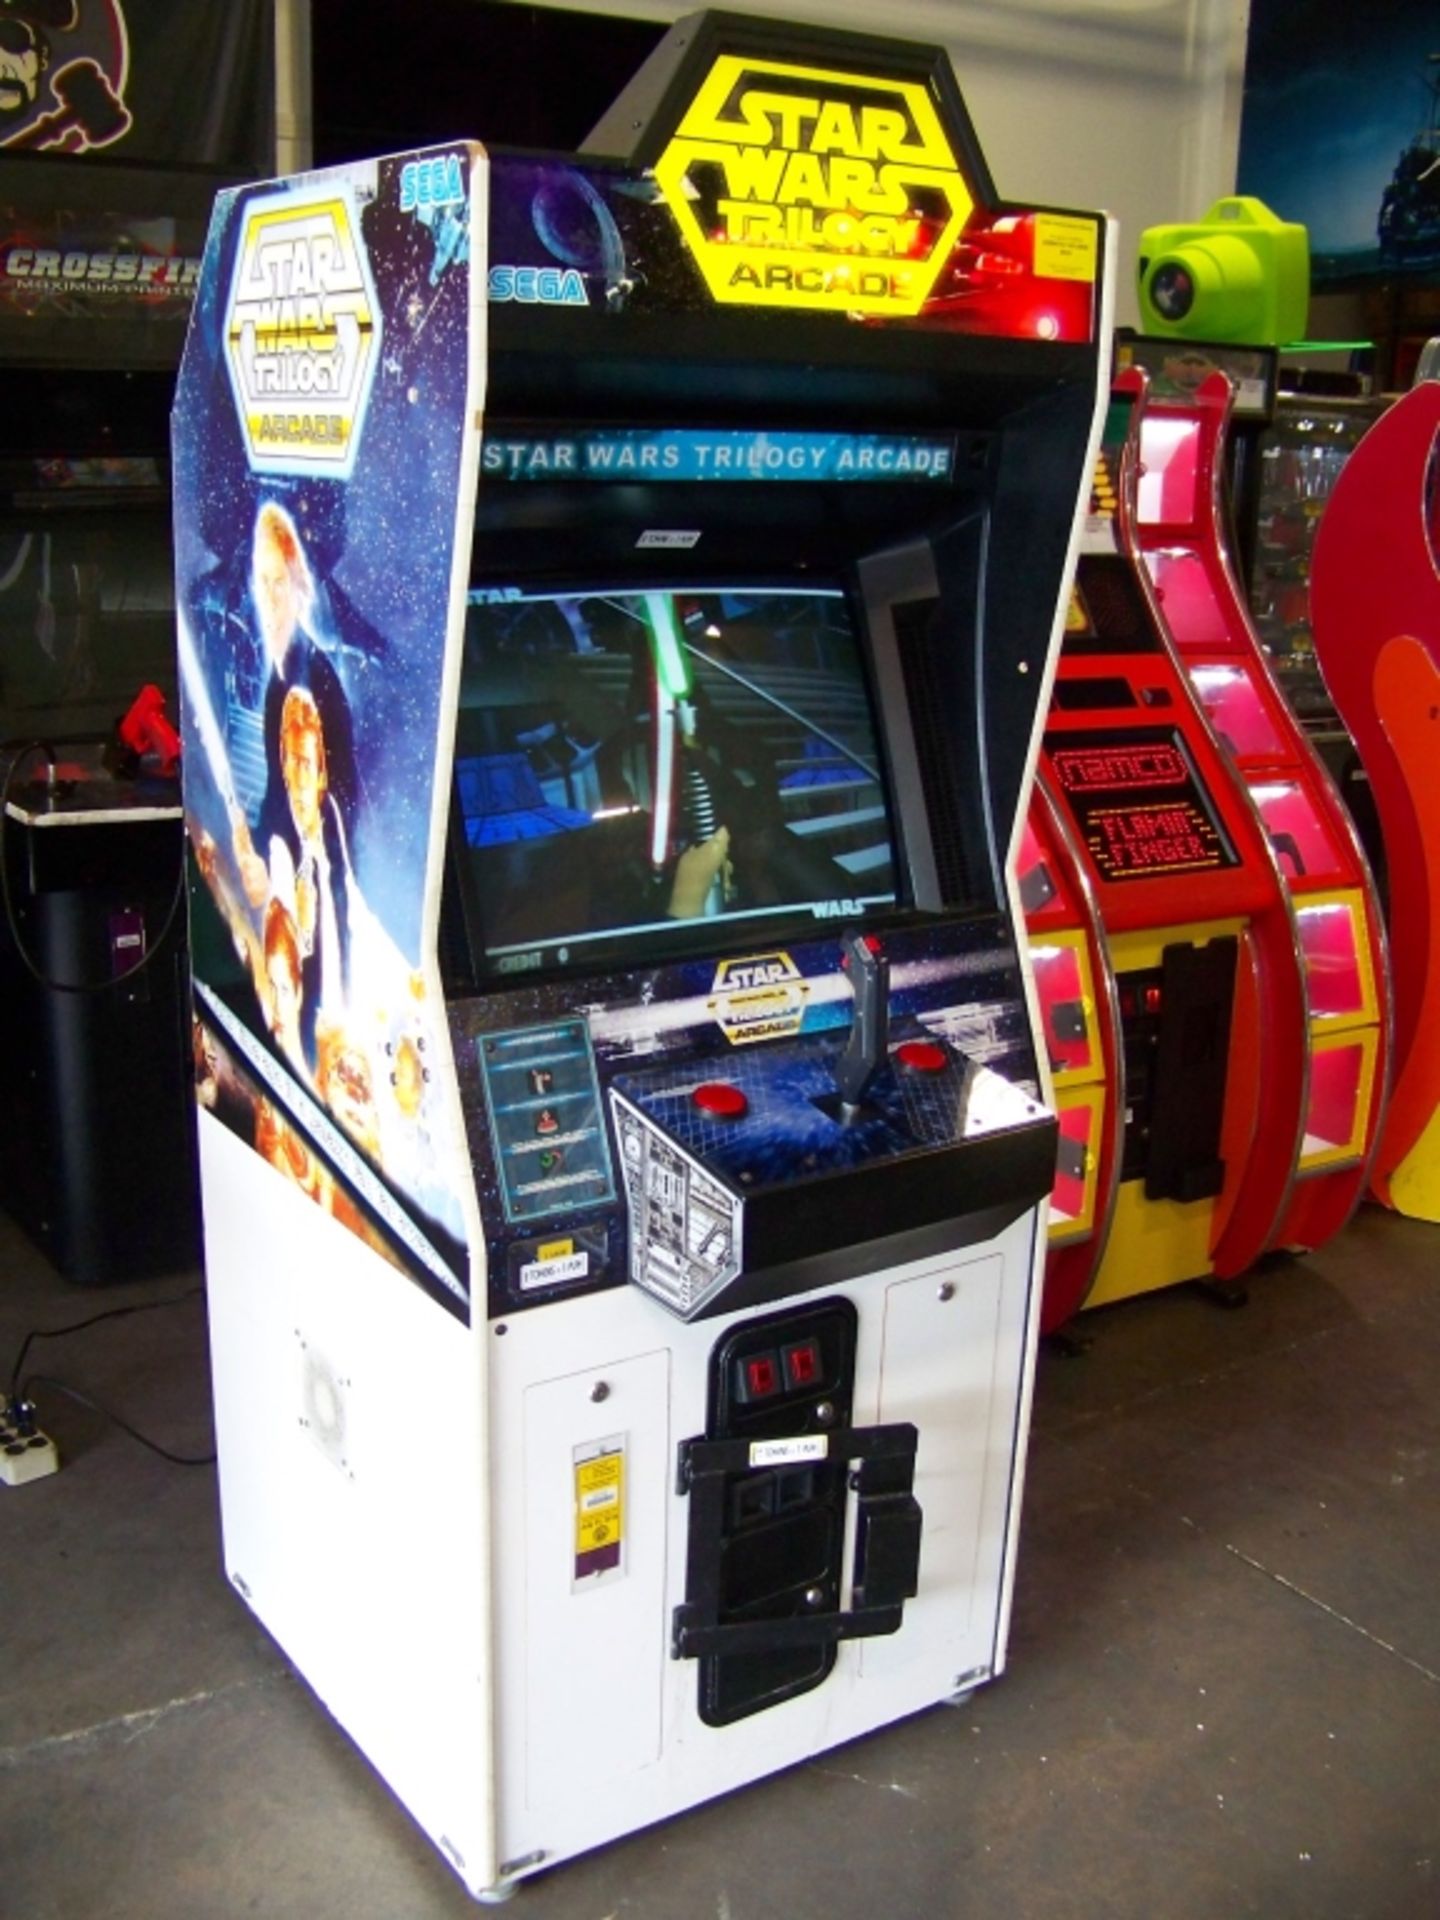 STAR WARS TRILOGY UPRIGHT ARCADE GAME SEGA Item is in used condition. Evidence of wear and